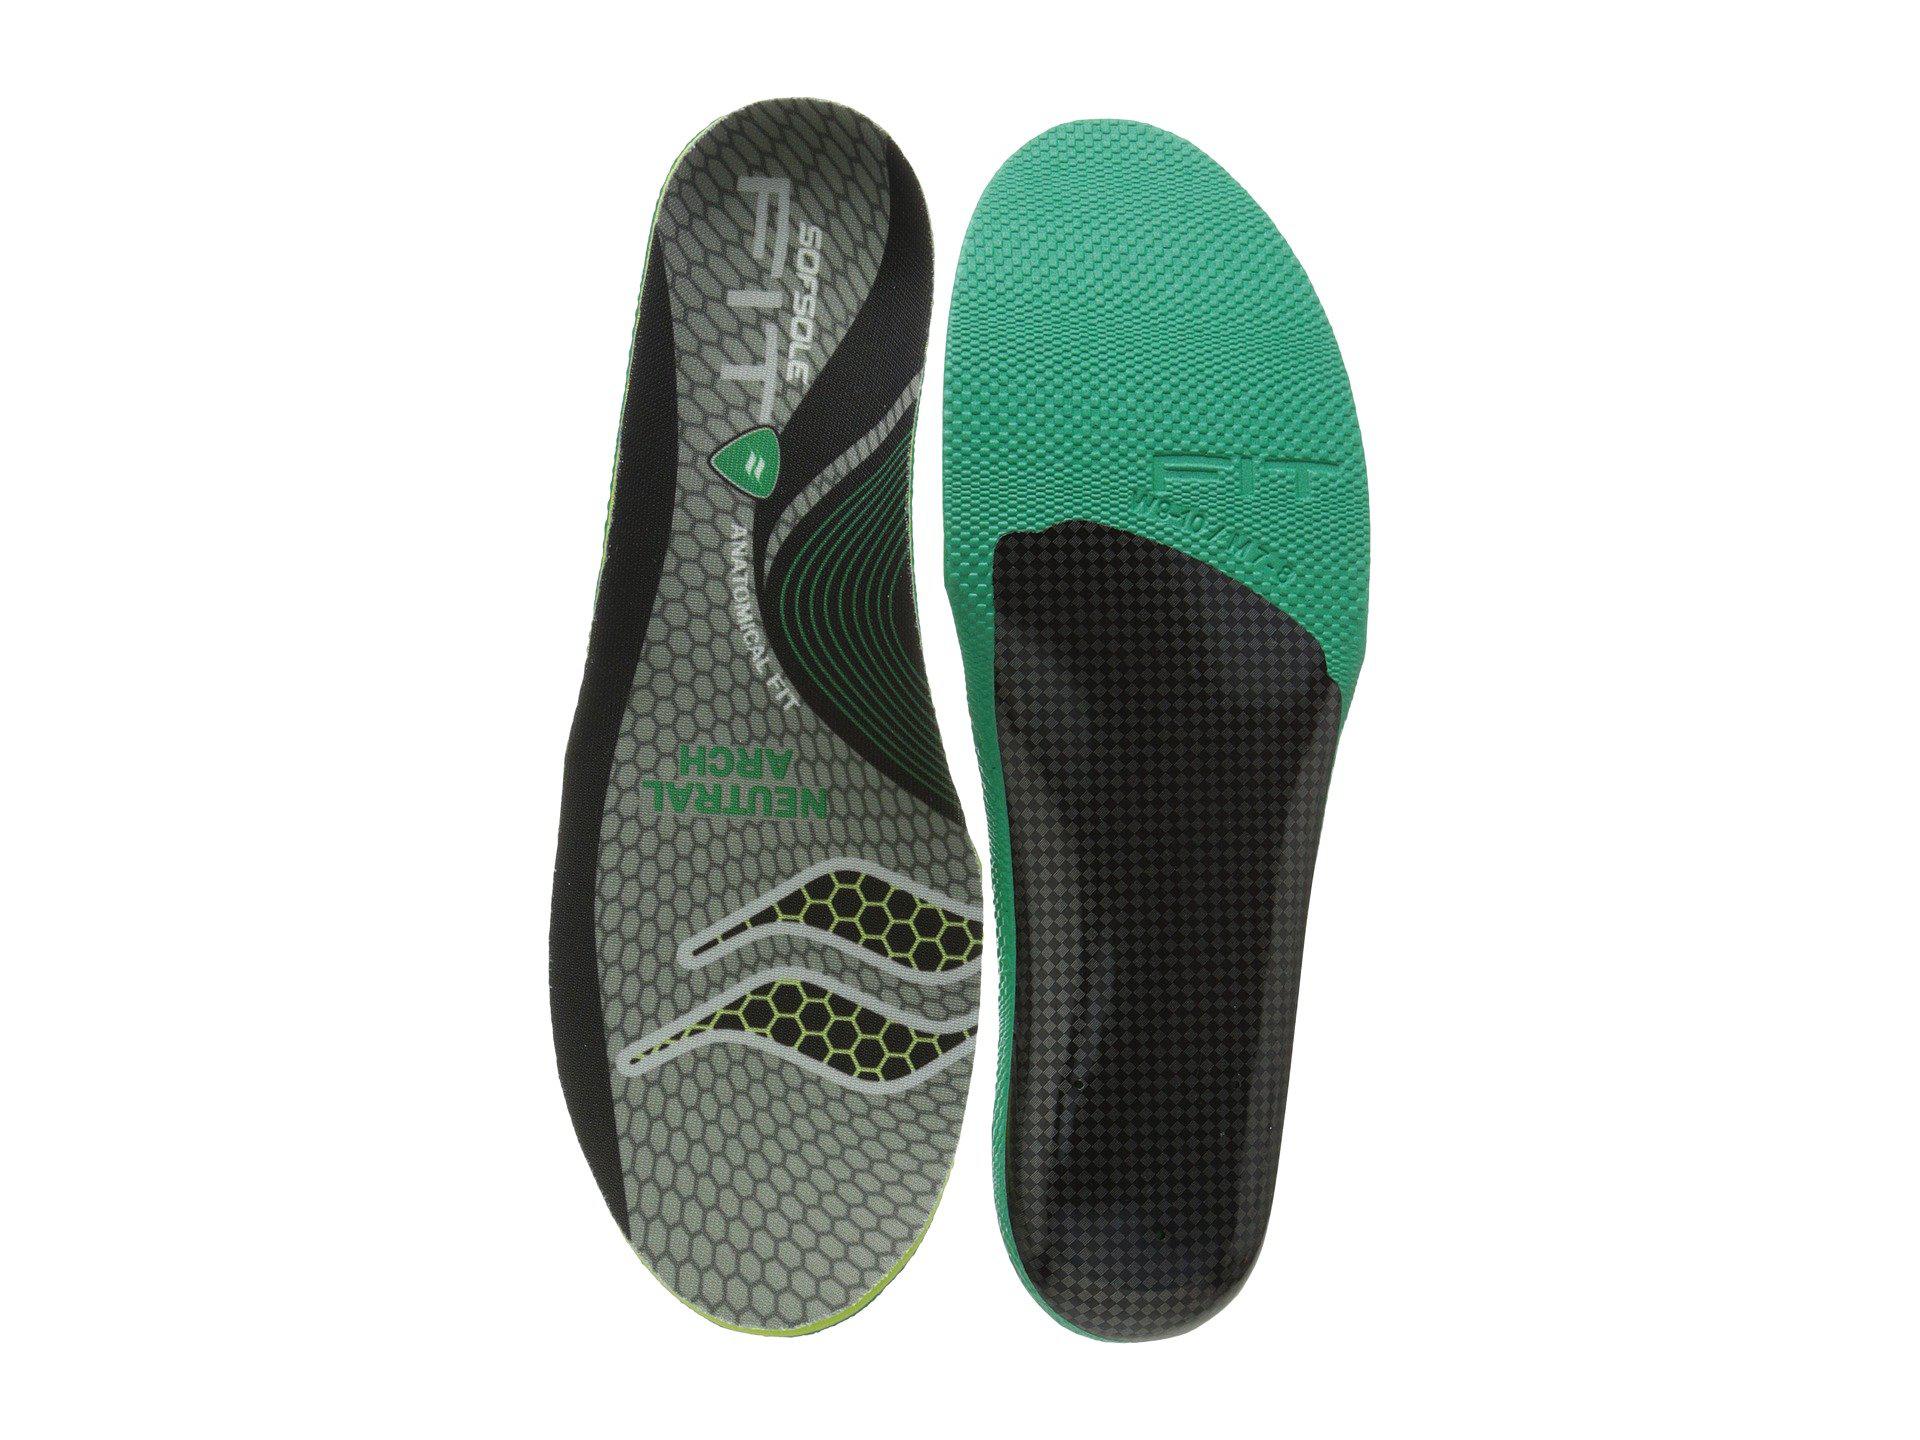 Sof Sole Fit Series Neutral Arch Insole (black/green